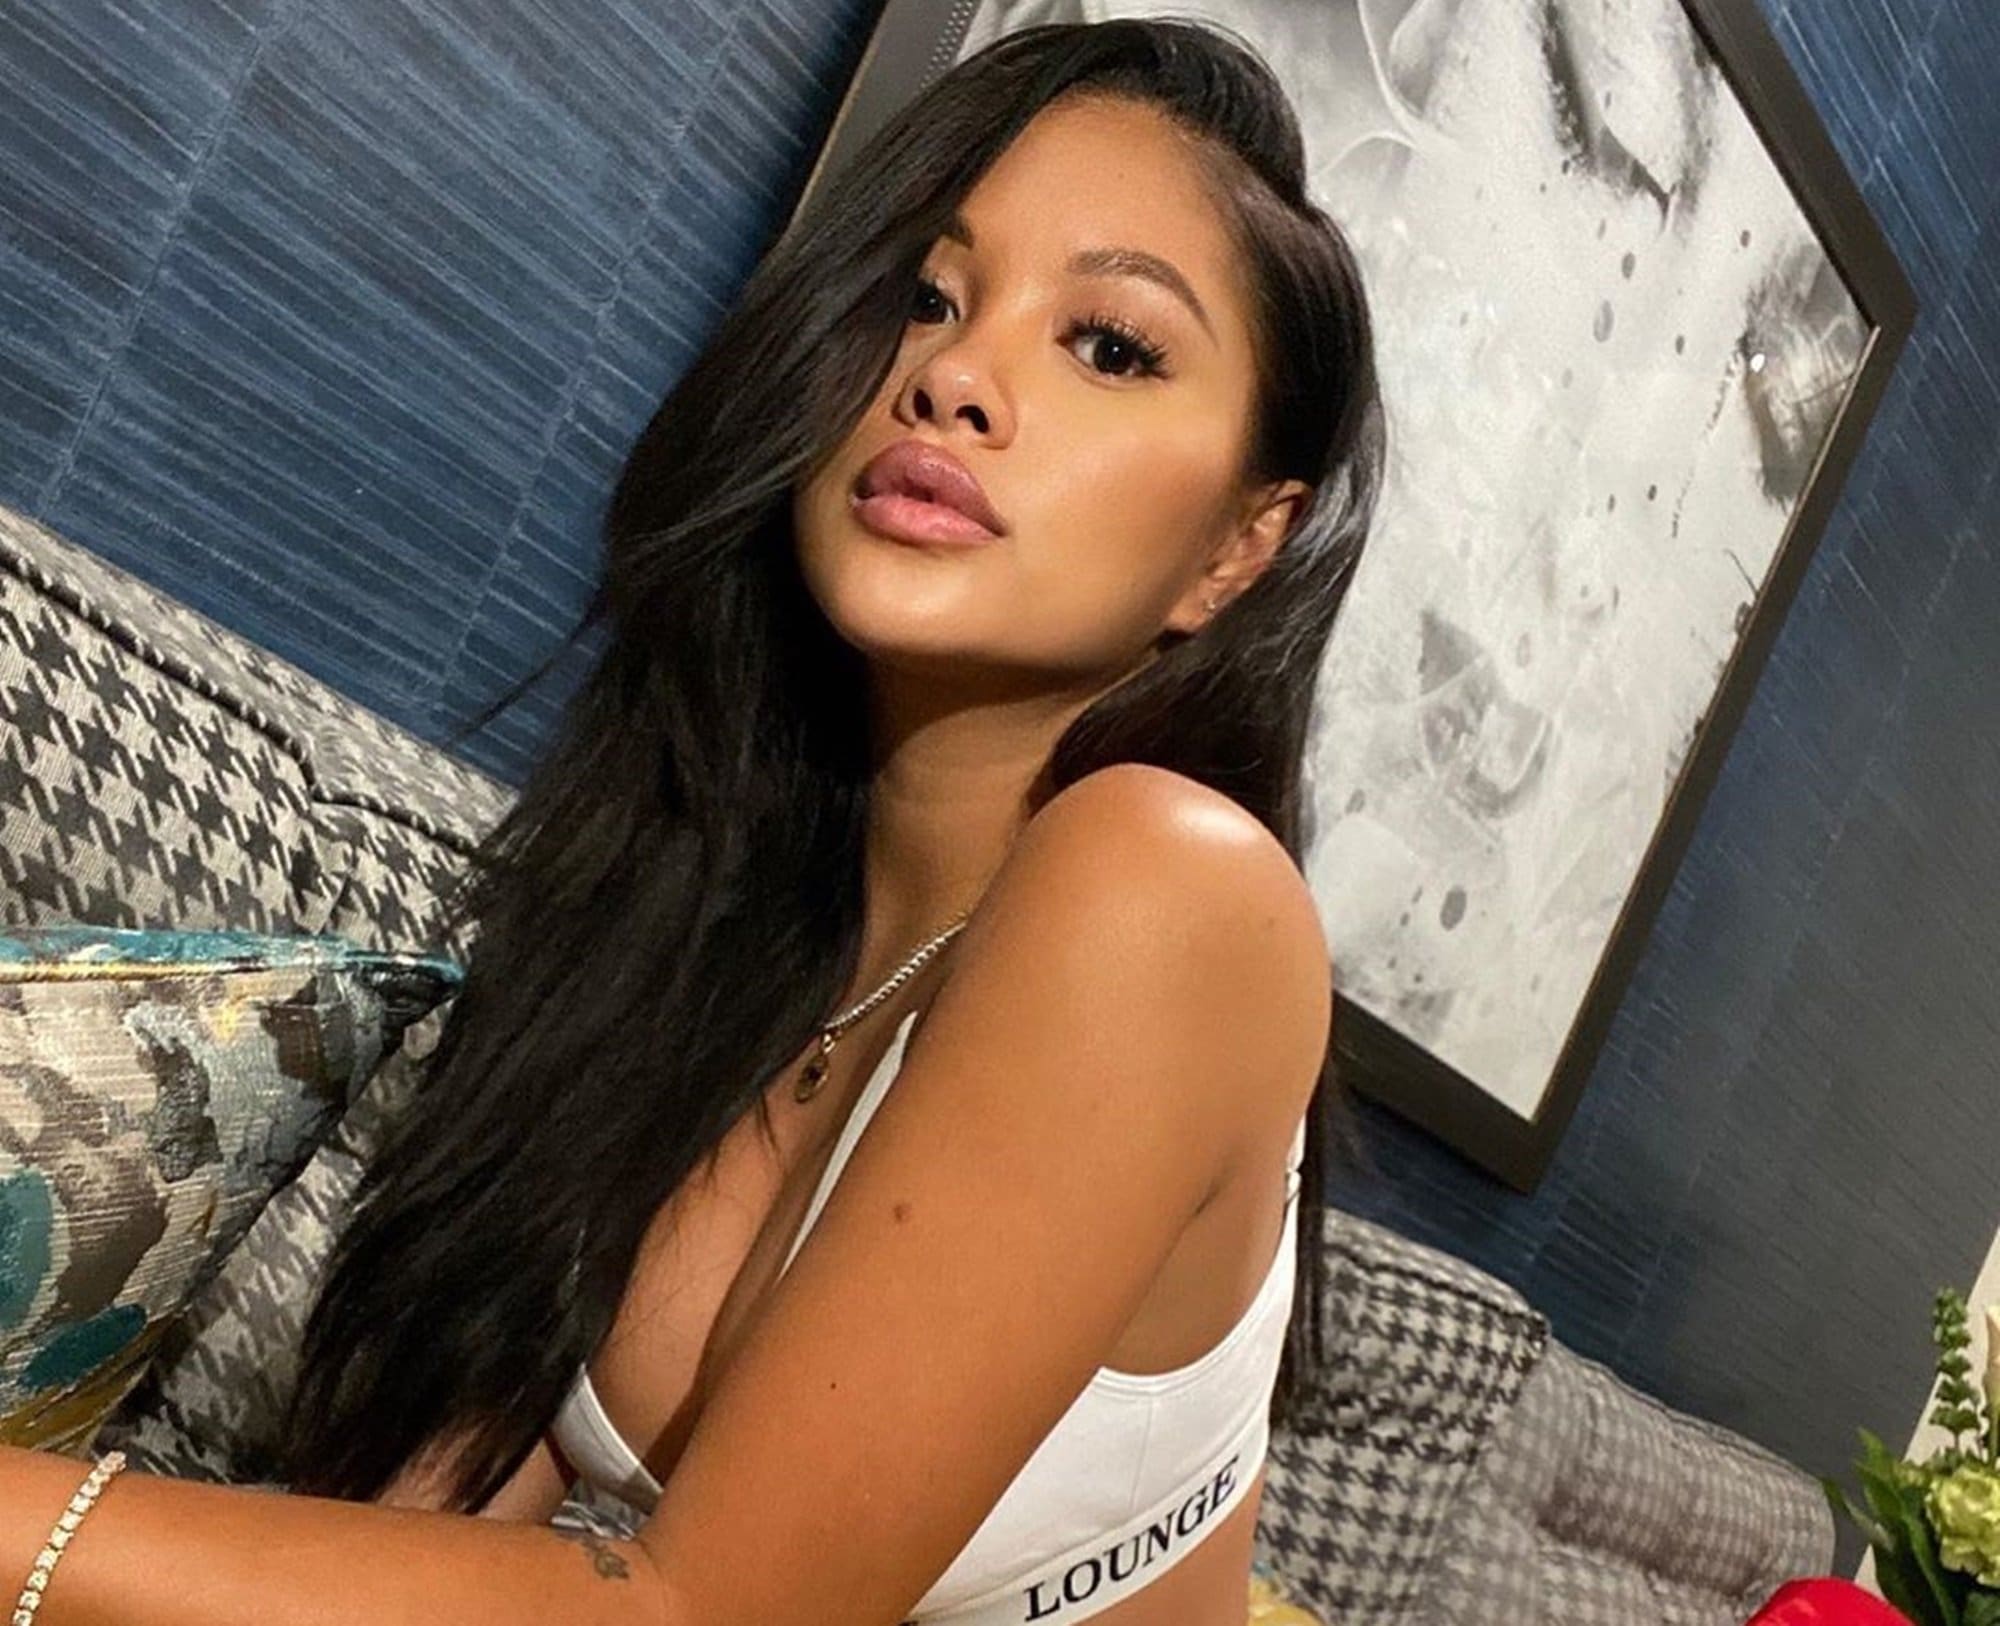 Chris Brown's Baby Mama, Ammika Harris' Clip & Photos Have Fans' Jaws Dropping Once Again: 'I See Those Muscles Poppin’'